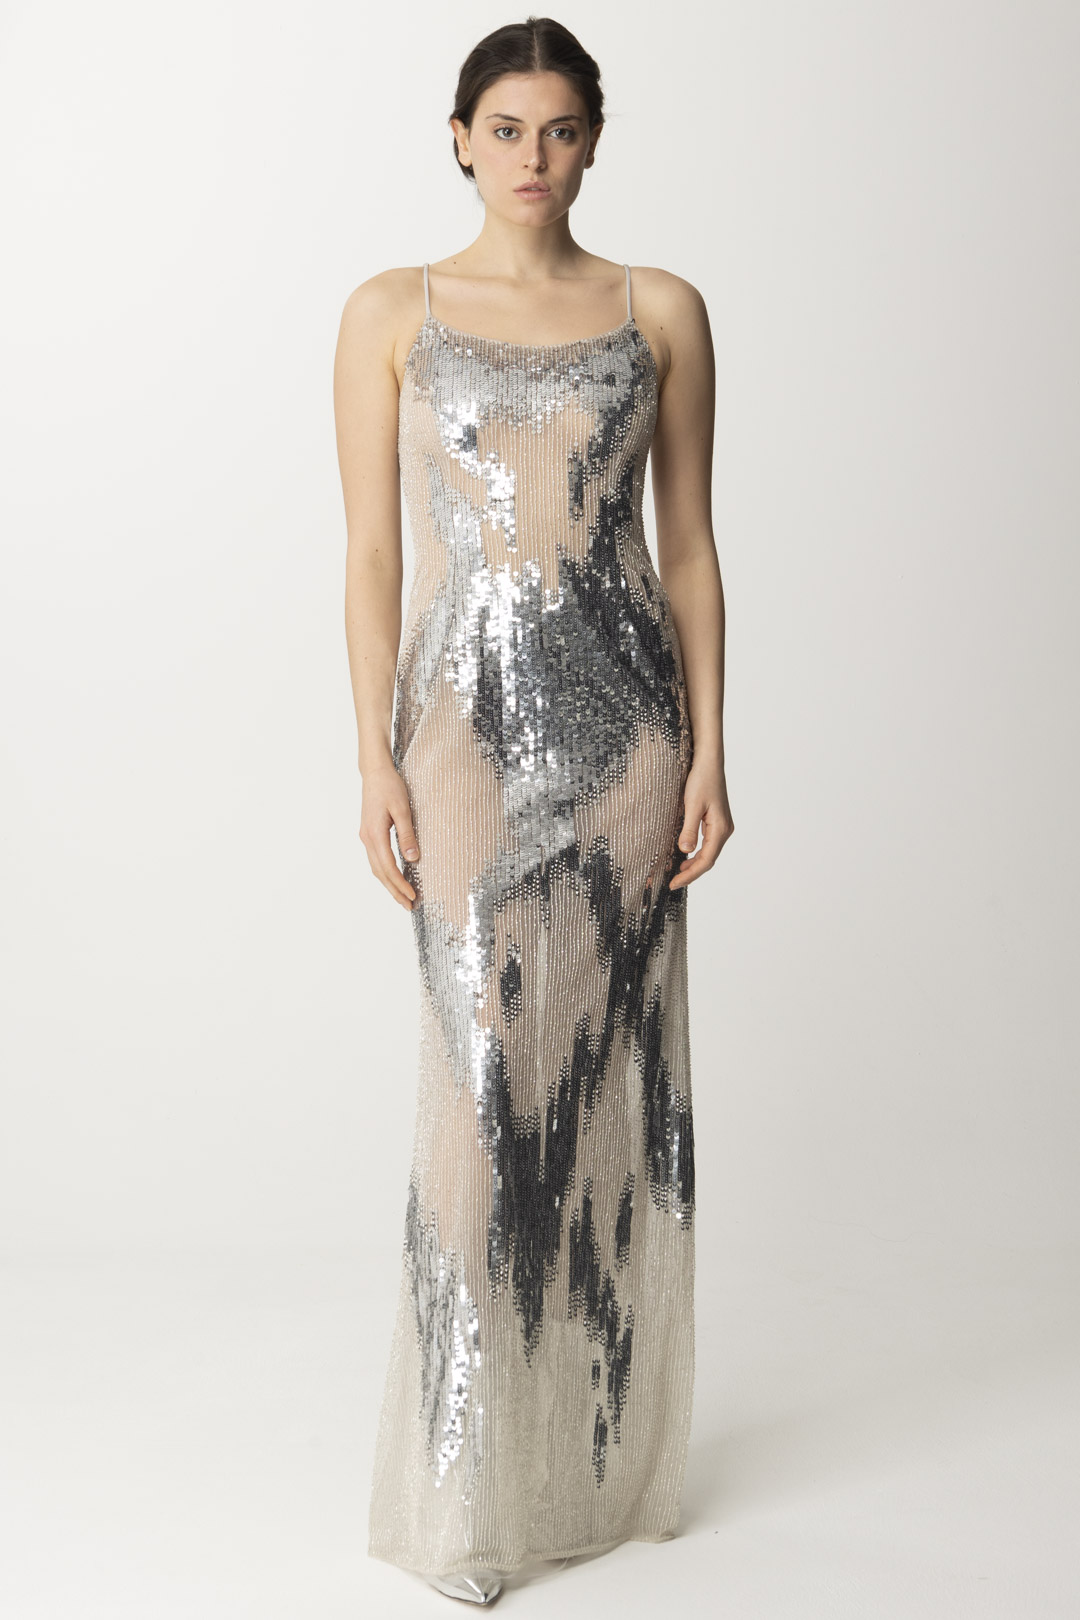 Preview: Elisabetta Franchi Red Carpet Dress in Tulle and Sequins Perla